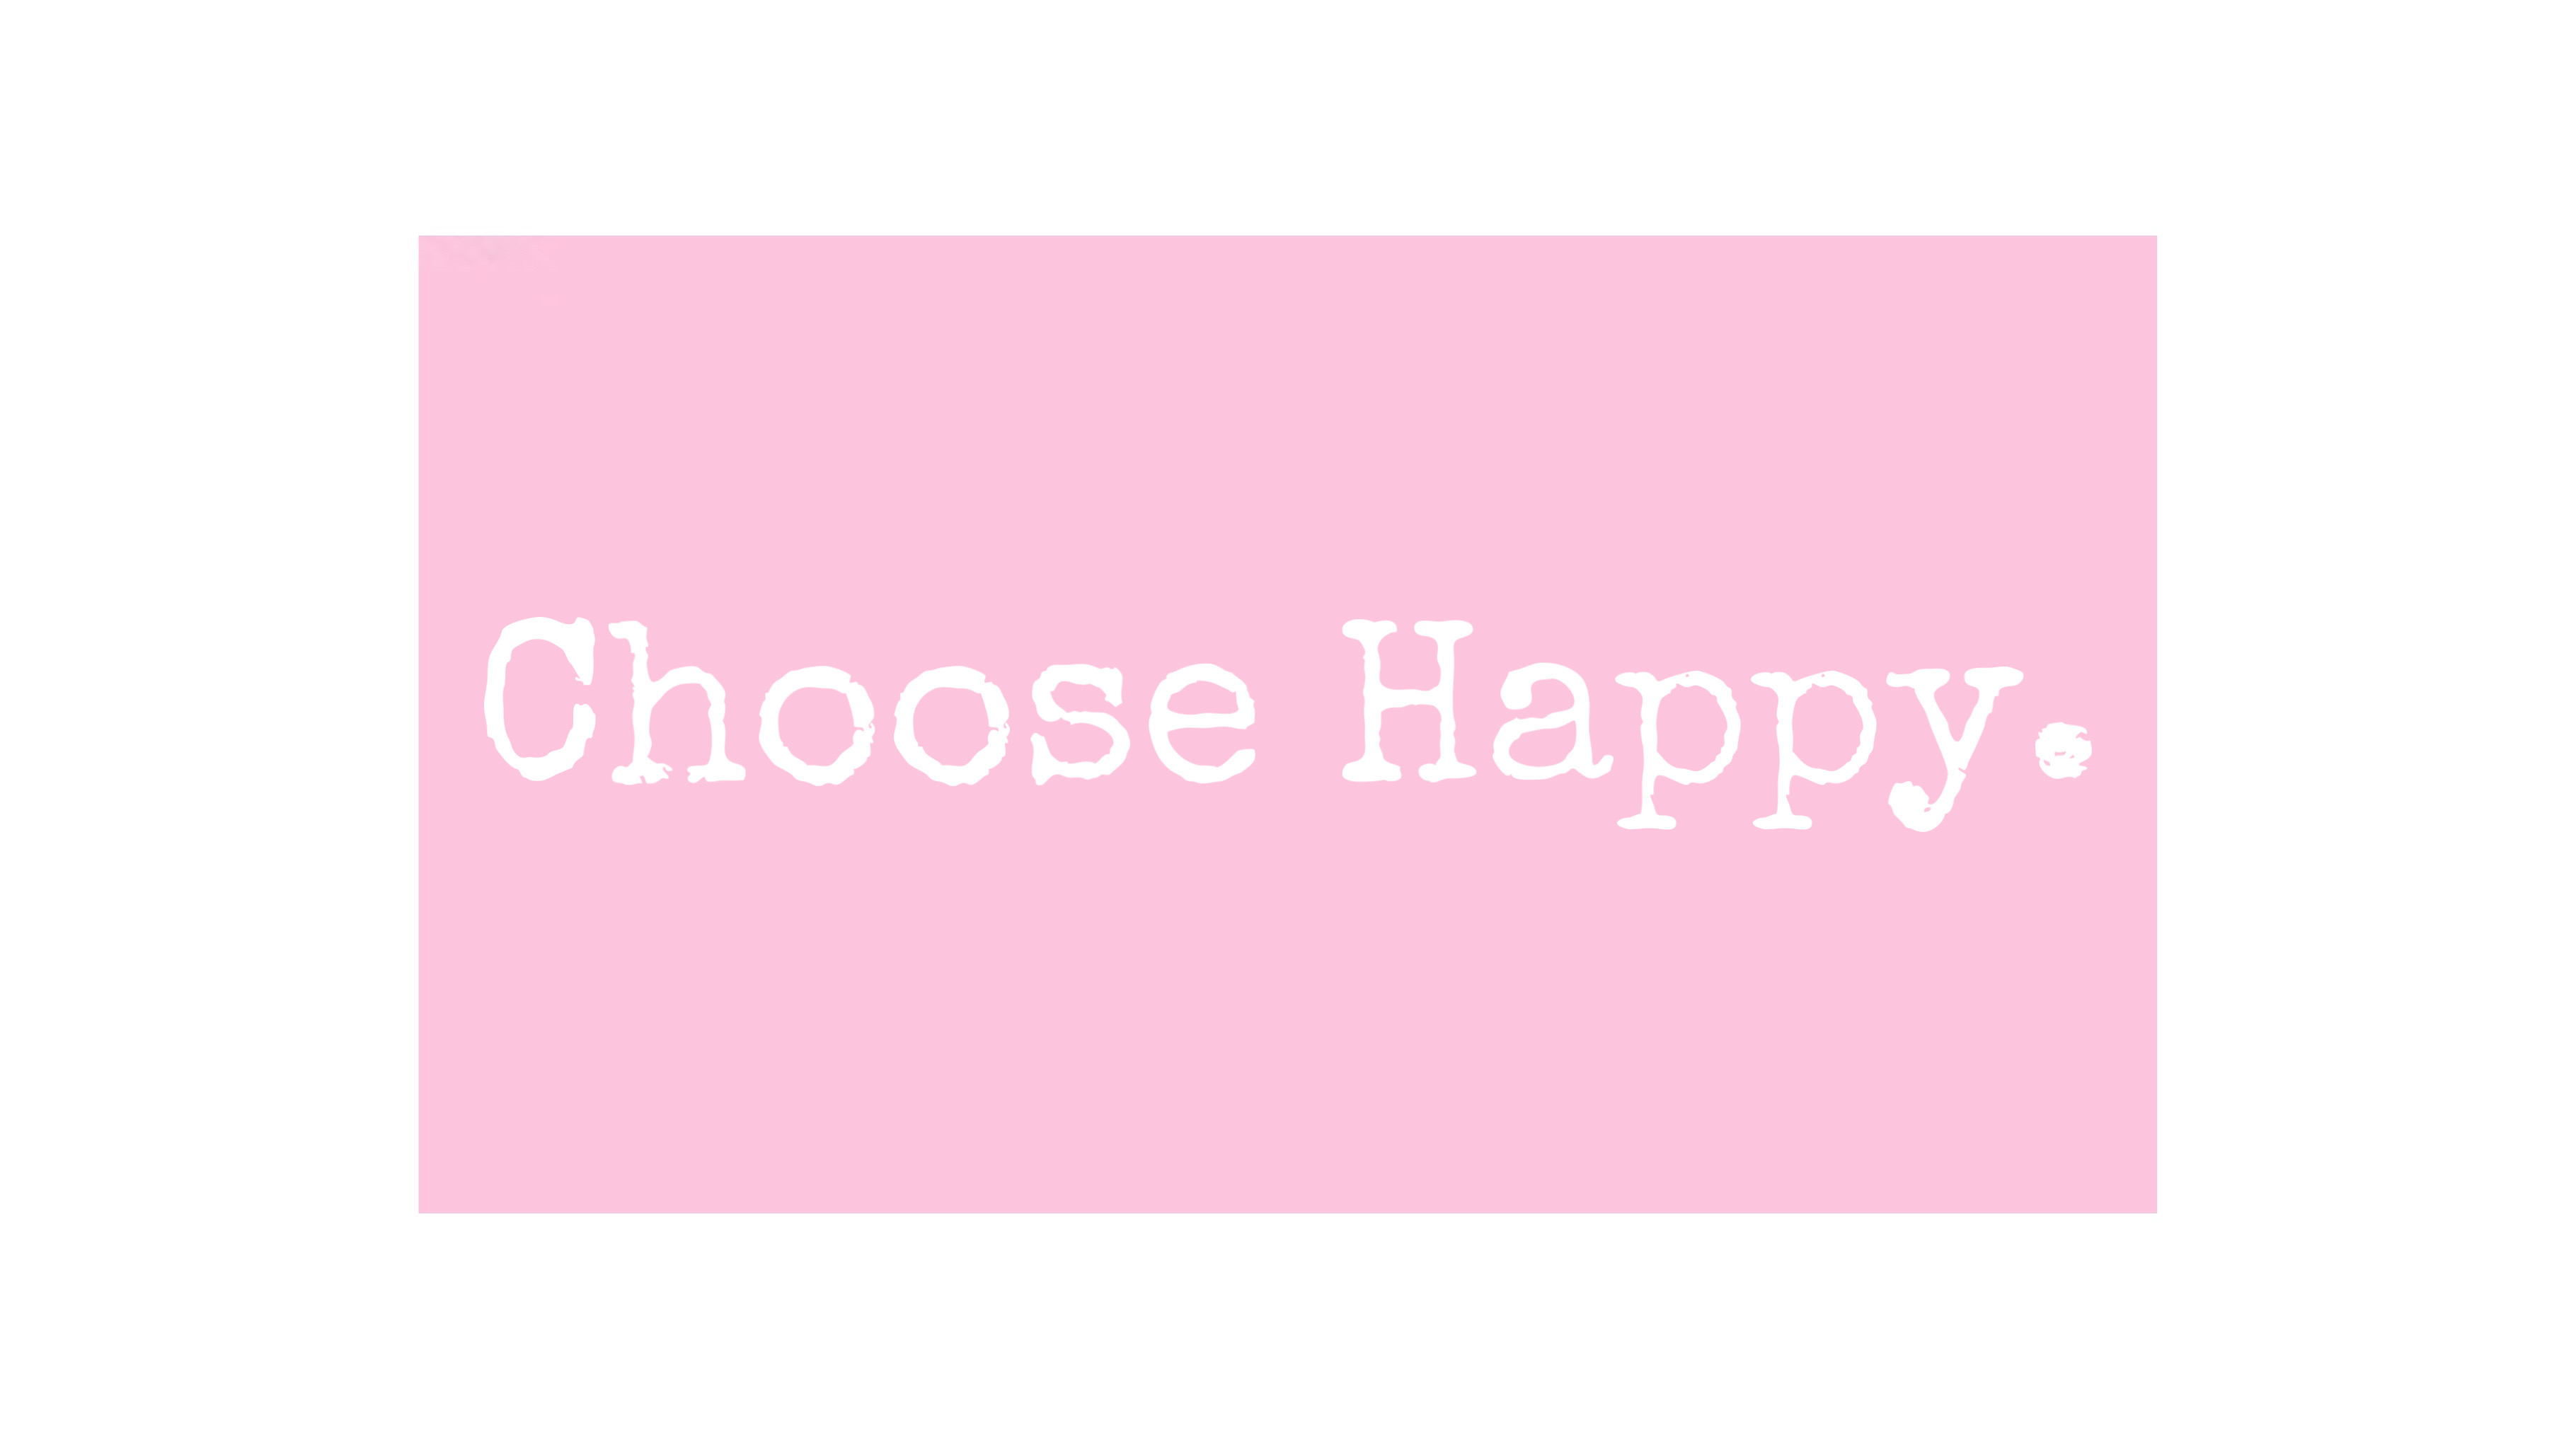 Choose to be happy with us